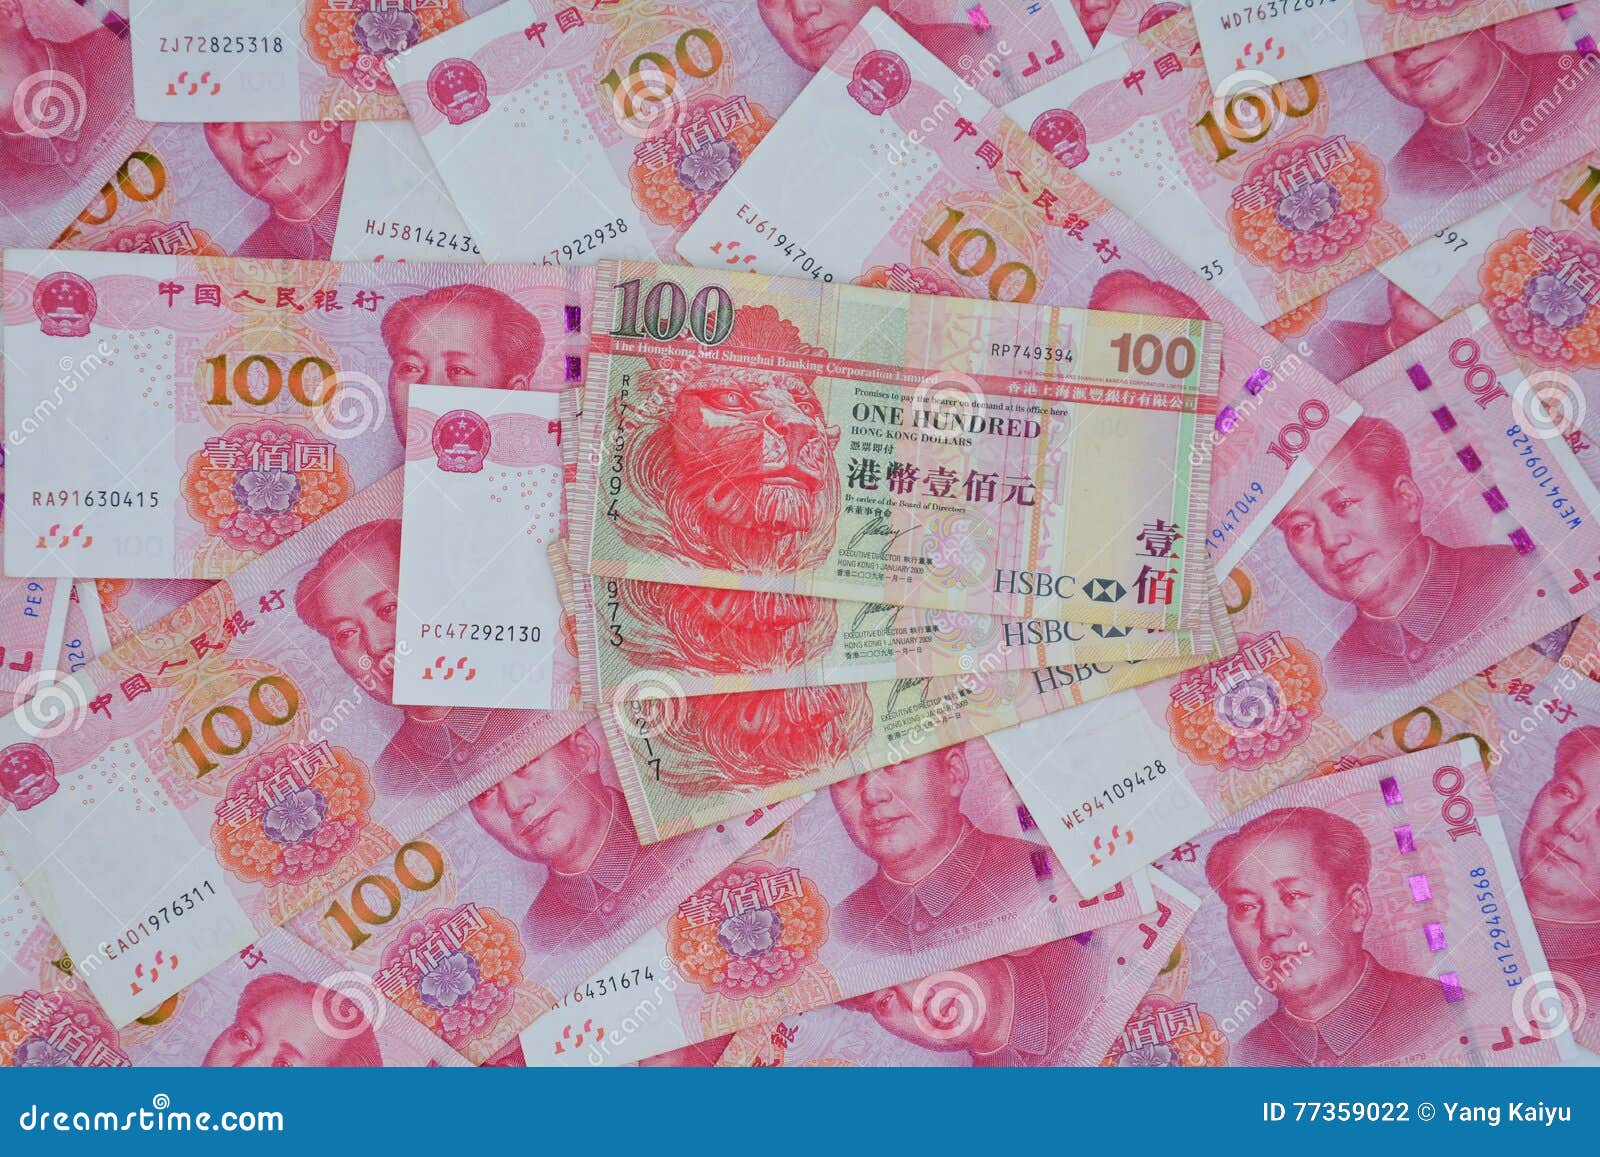 Chinese Currency | Chinese Yuan vs Dollar | Currency Name | Currency Code | Currency Symbol